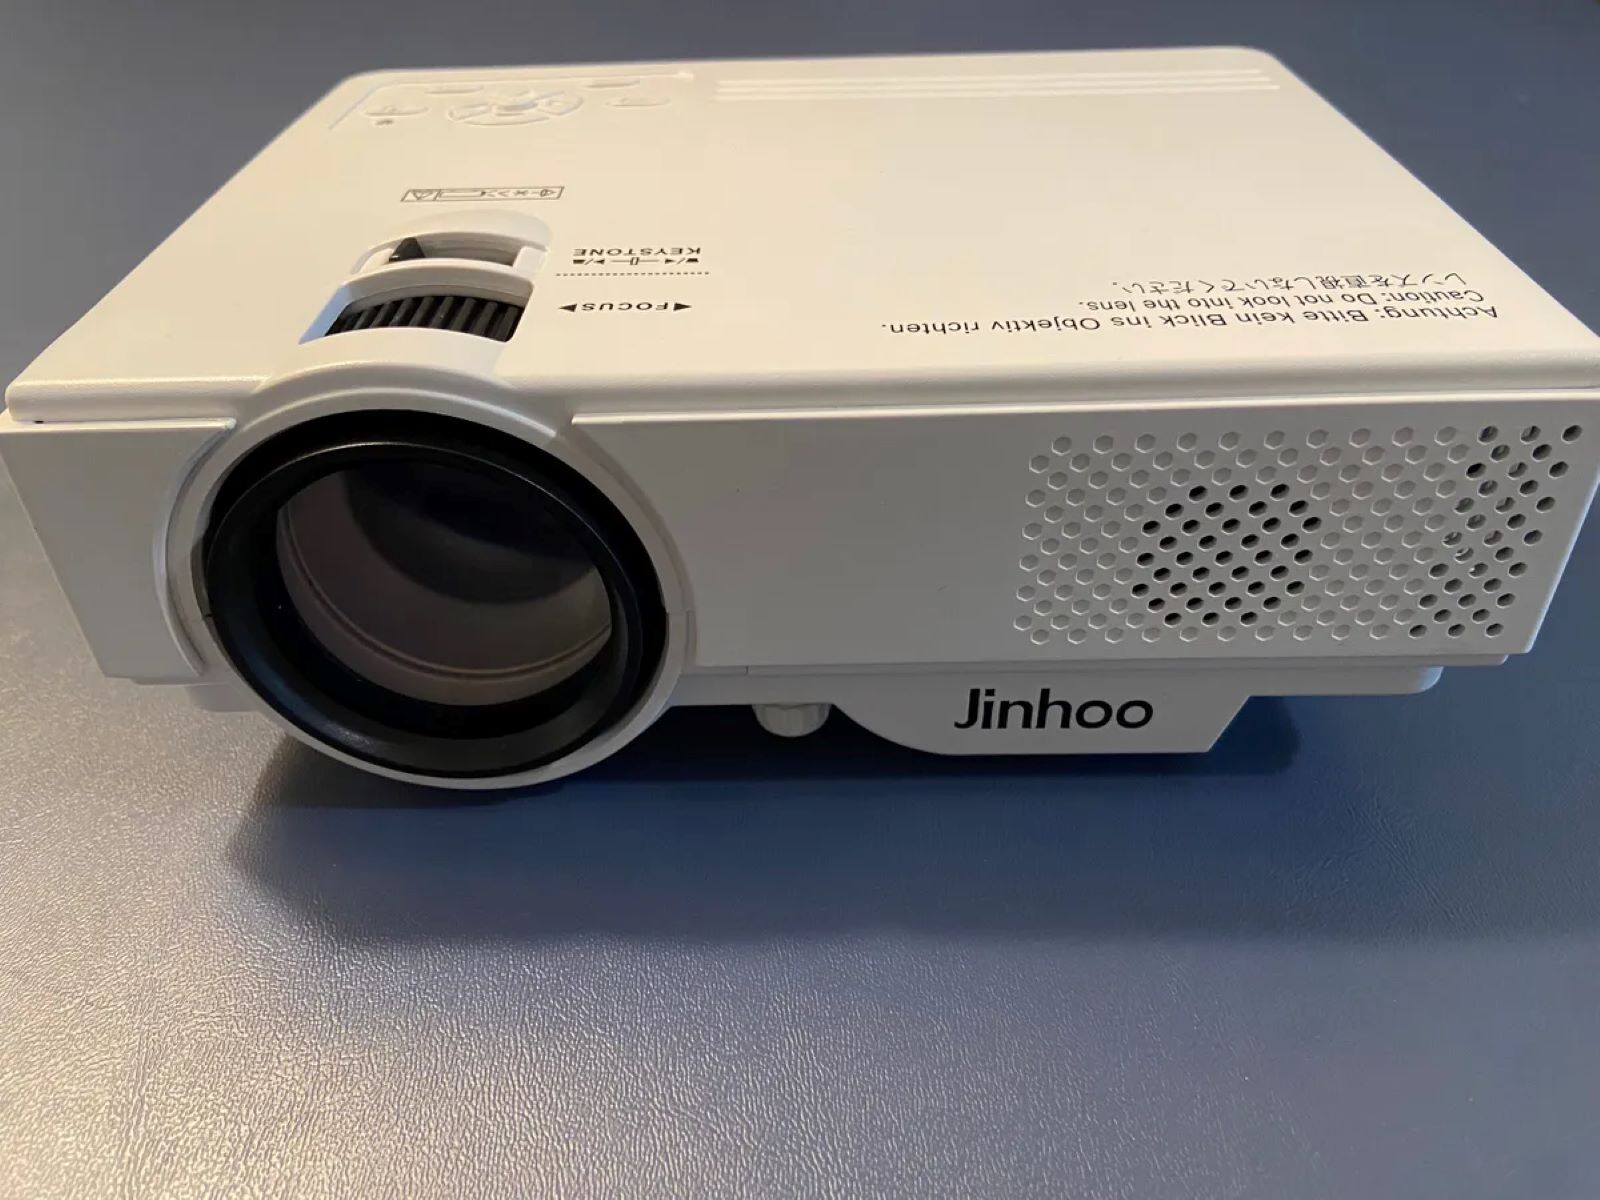 Connecting Your Phone To Jinhoo Projector: Easy Setup Guide